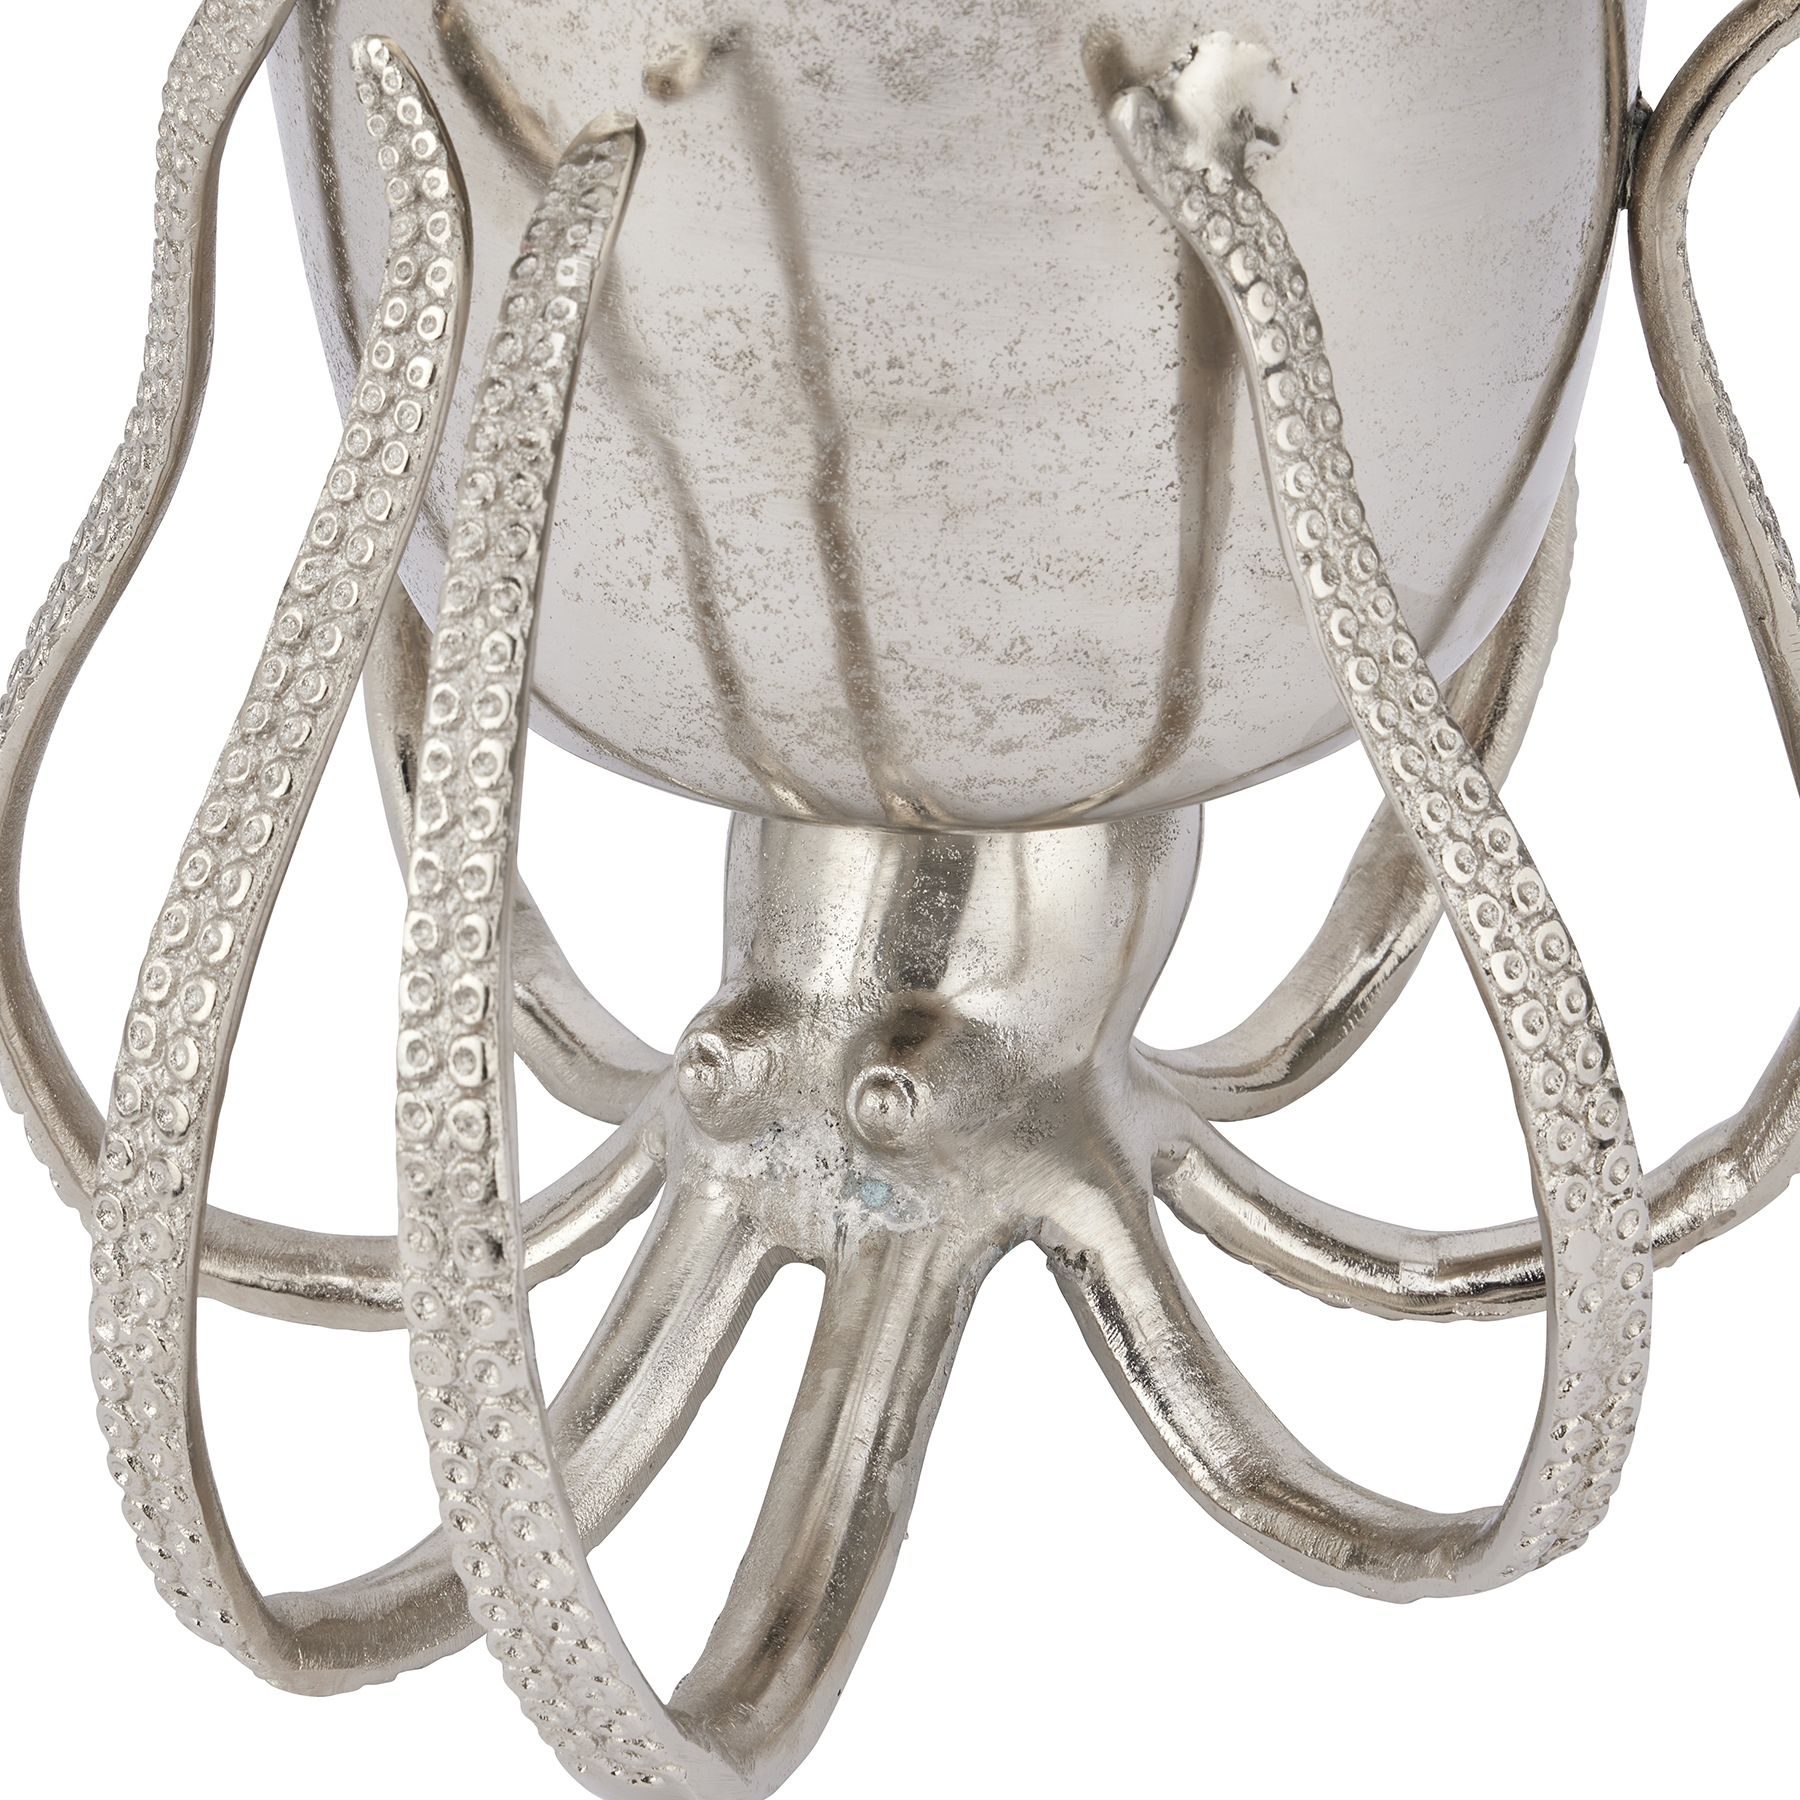 Large Octopus Champagne Bucket - Image 2